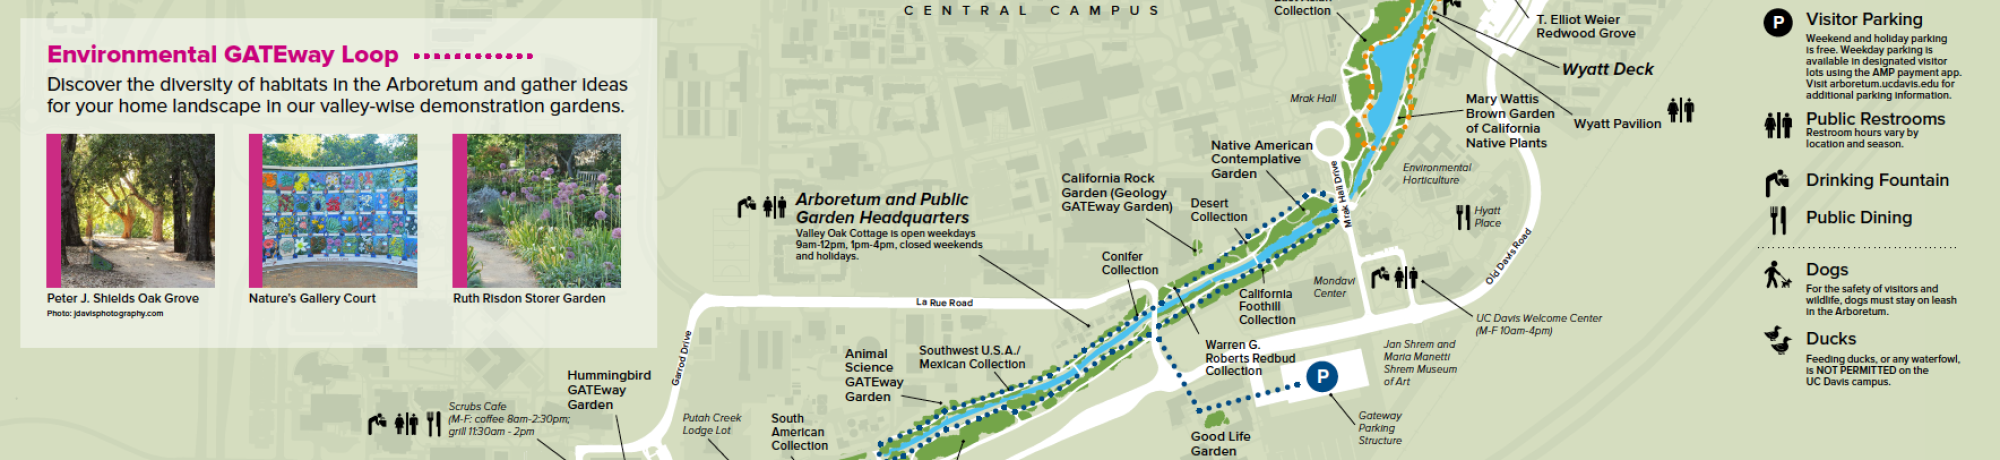 A portion of the UC Davis Arboretum and Public Garden visitor map.